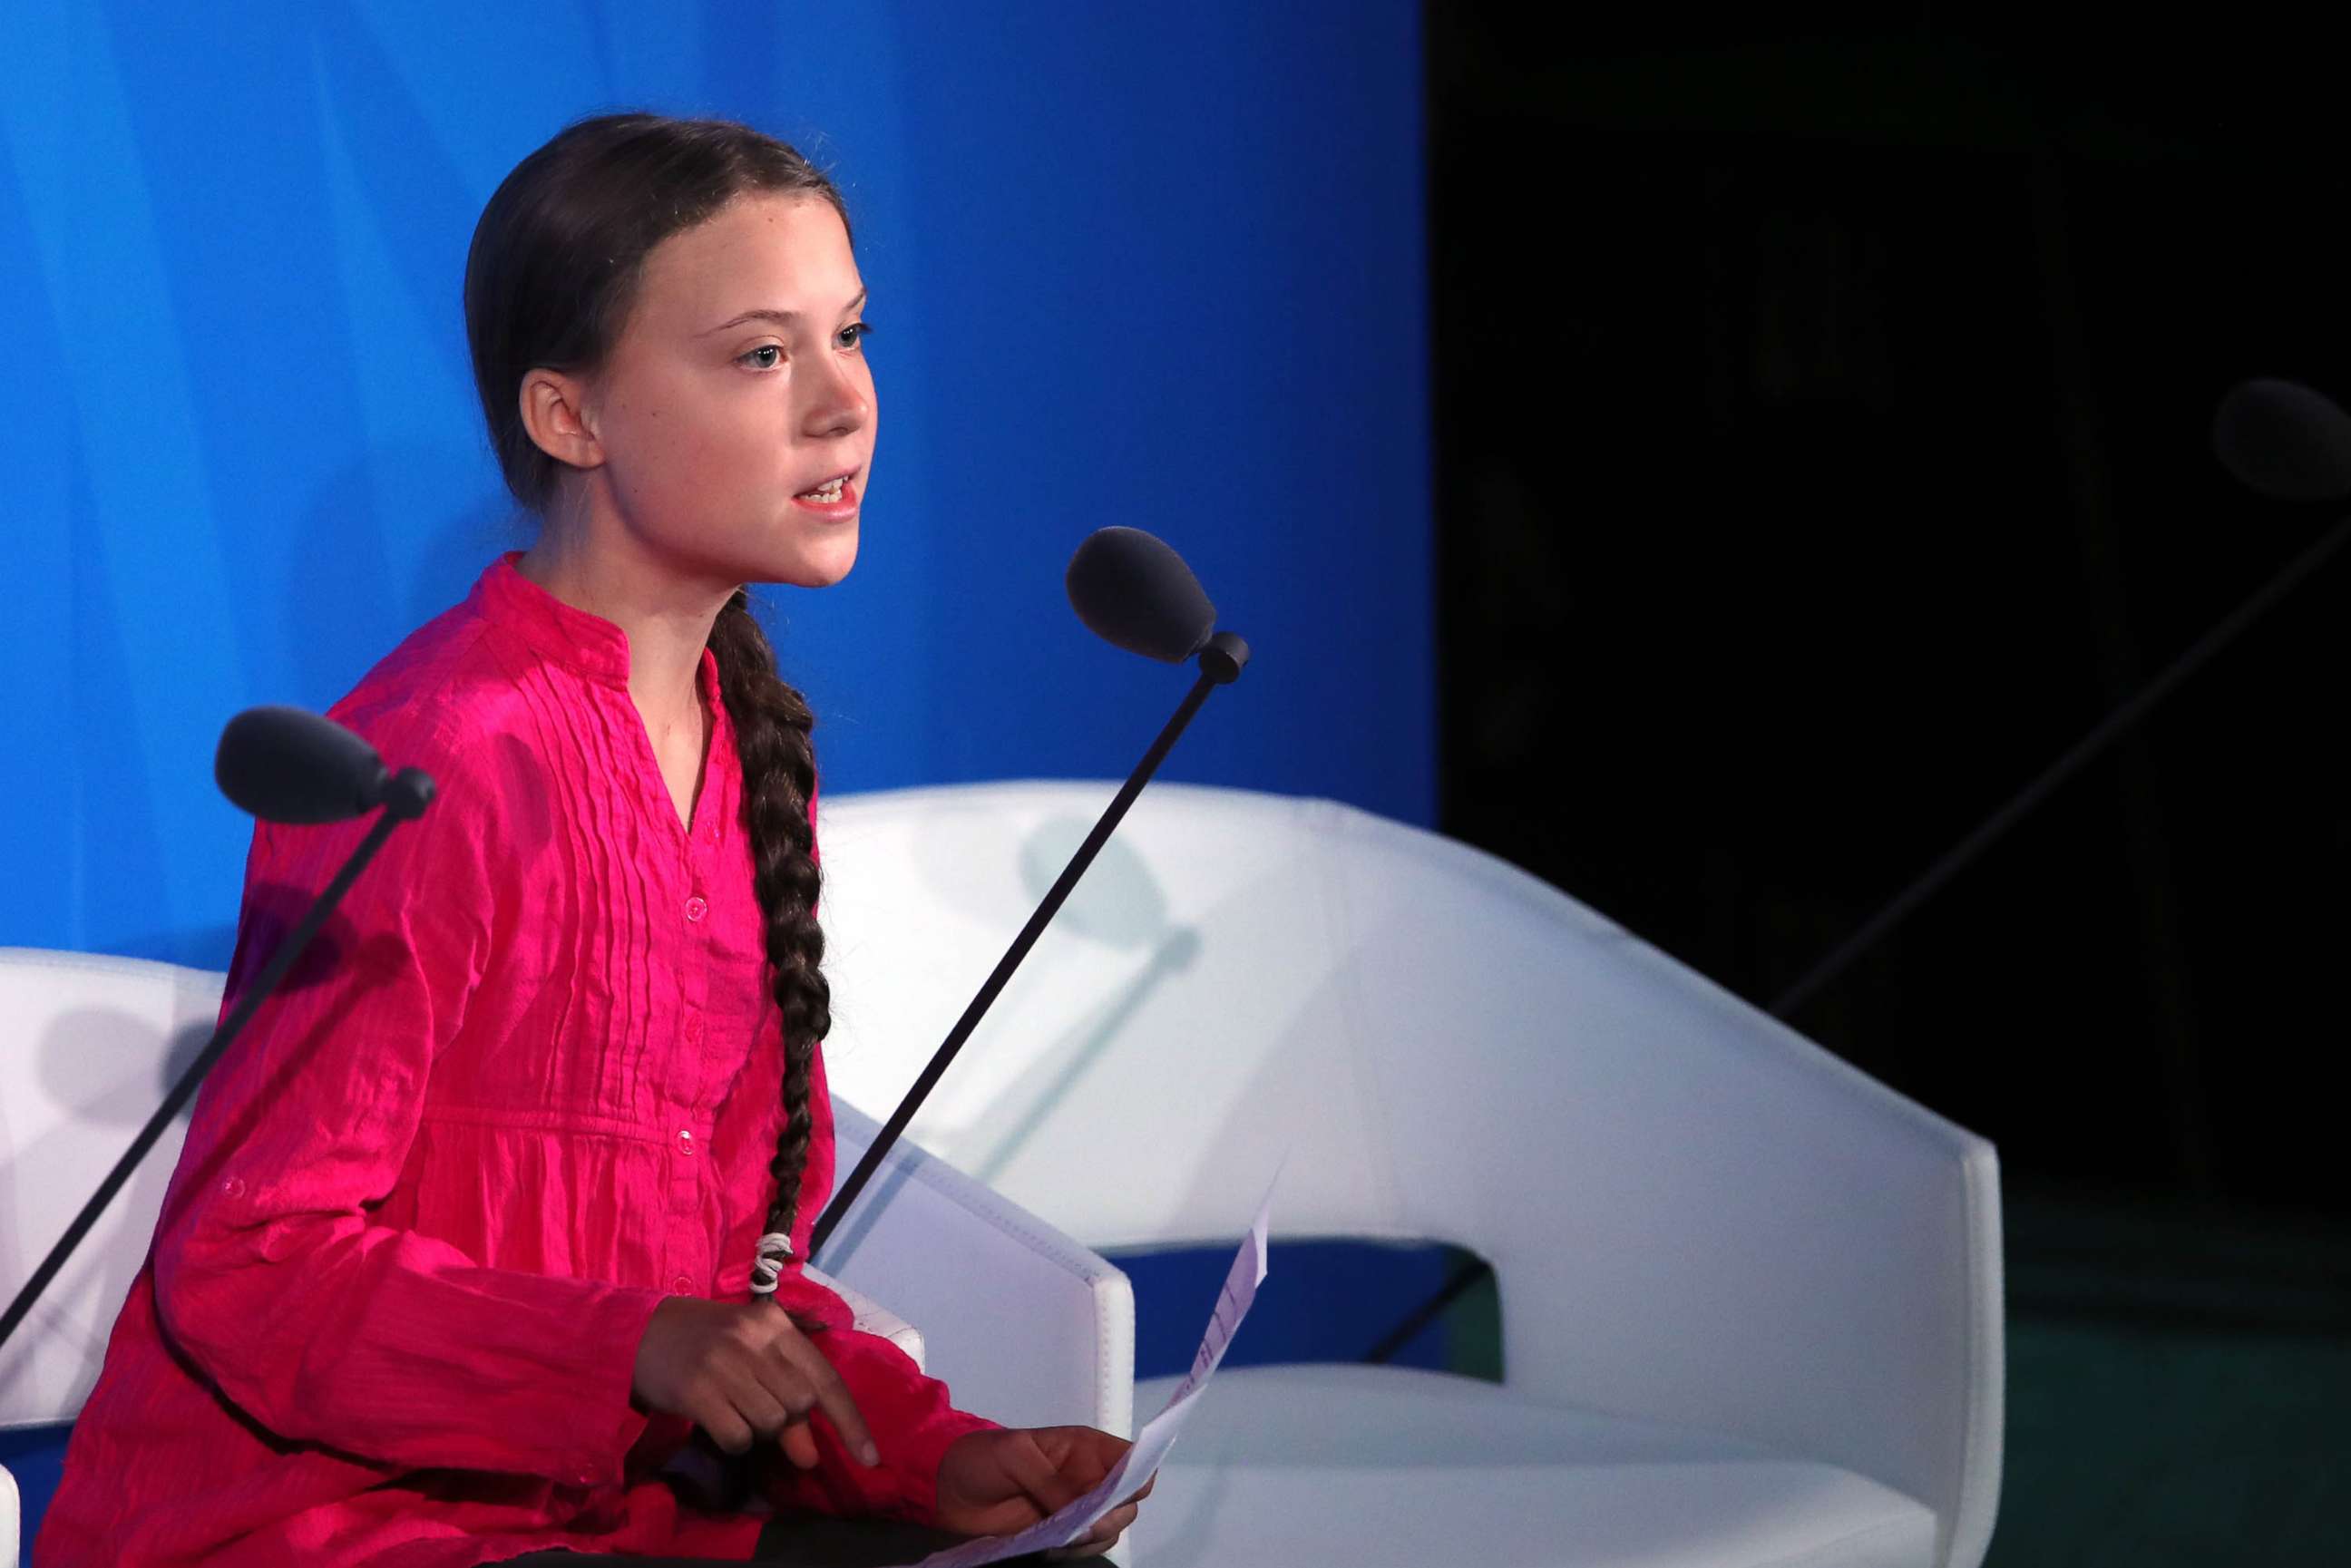 PHOTO: Greta Thunberg speaks at the United Nations where world leaders are holding a summit on climate change, Sept. 23, 2019, in New York.